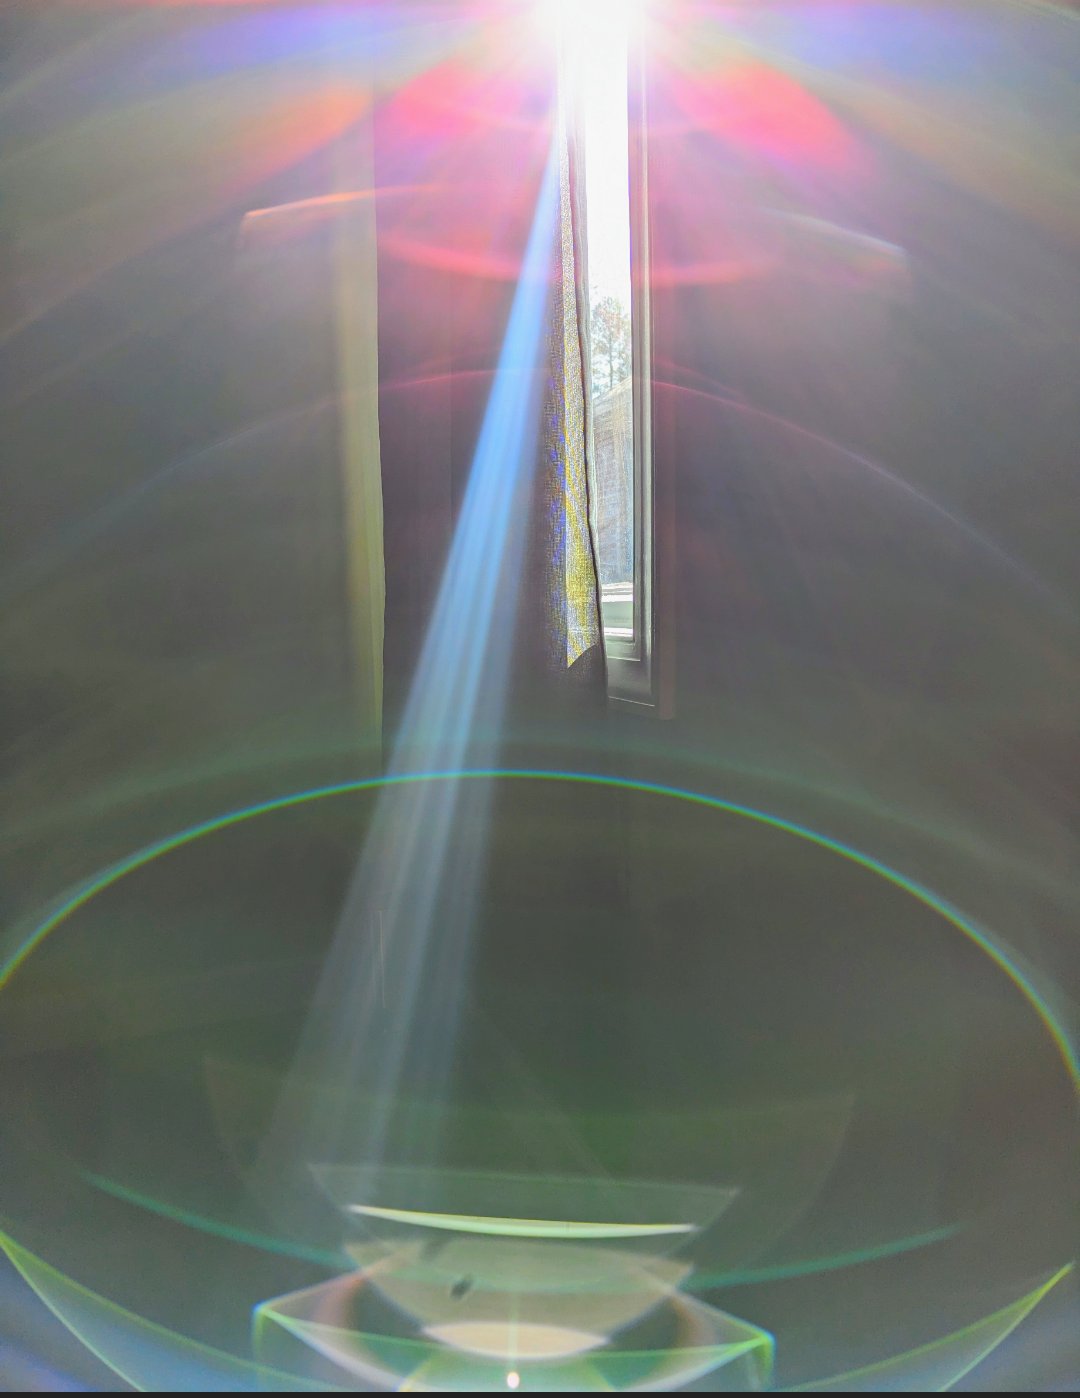 Incredible photonic light is here for you to heal